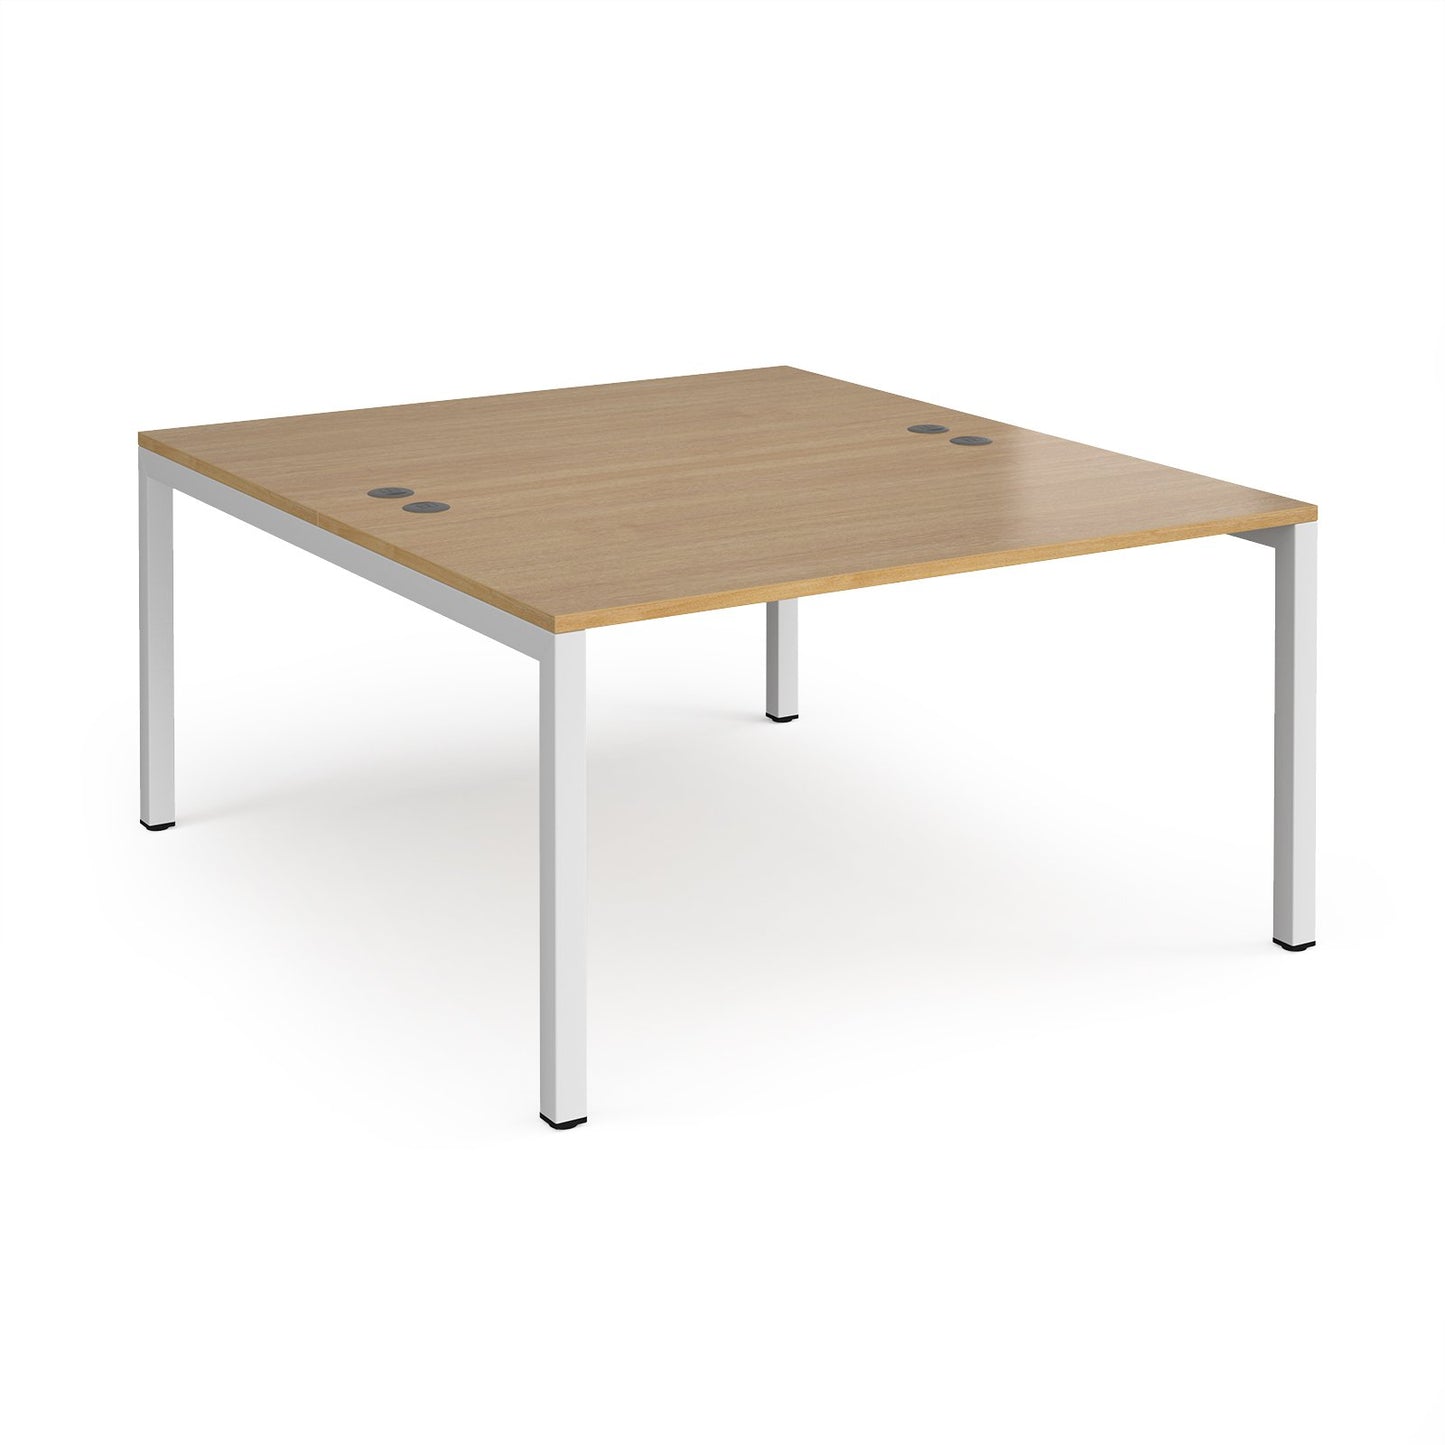 2 persons | Connex -  back to back bench desk 1600mm deep